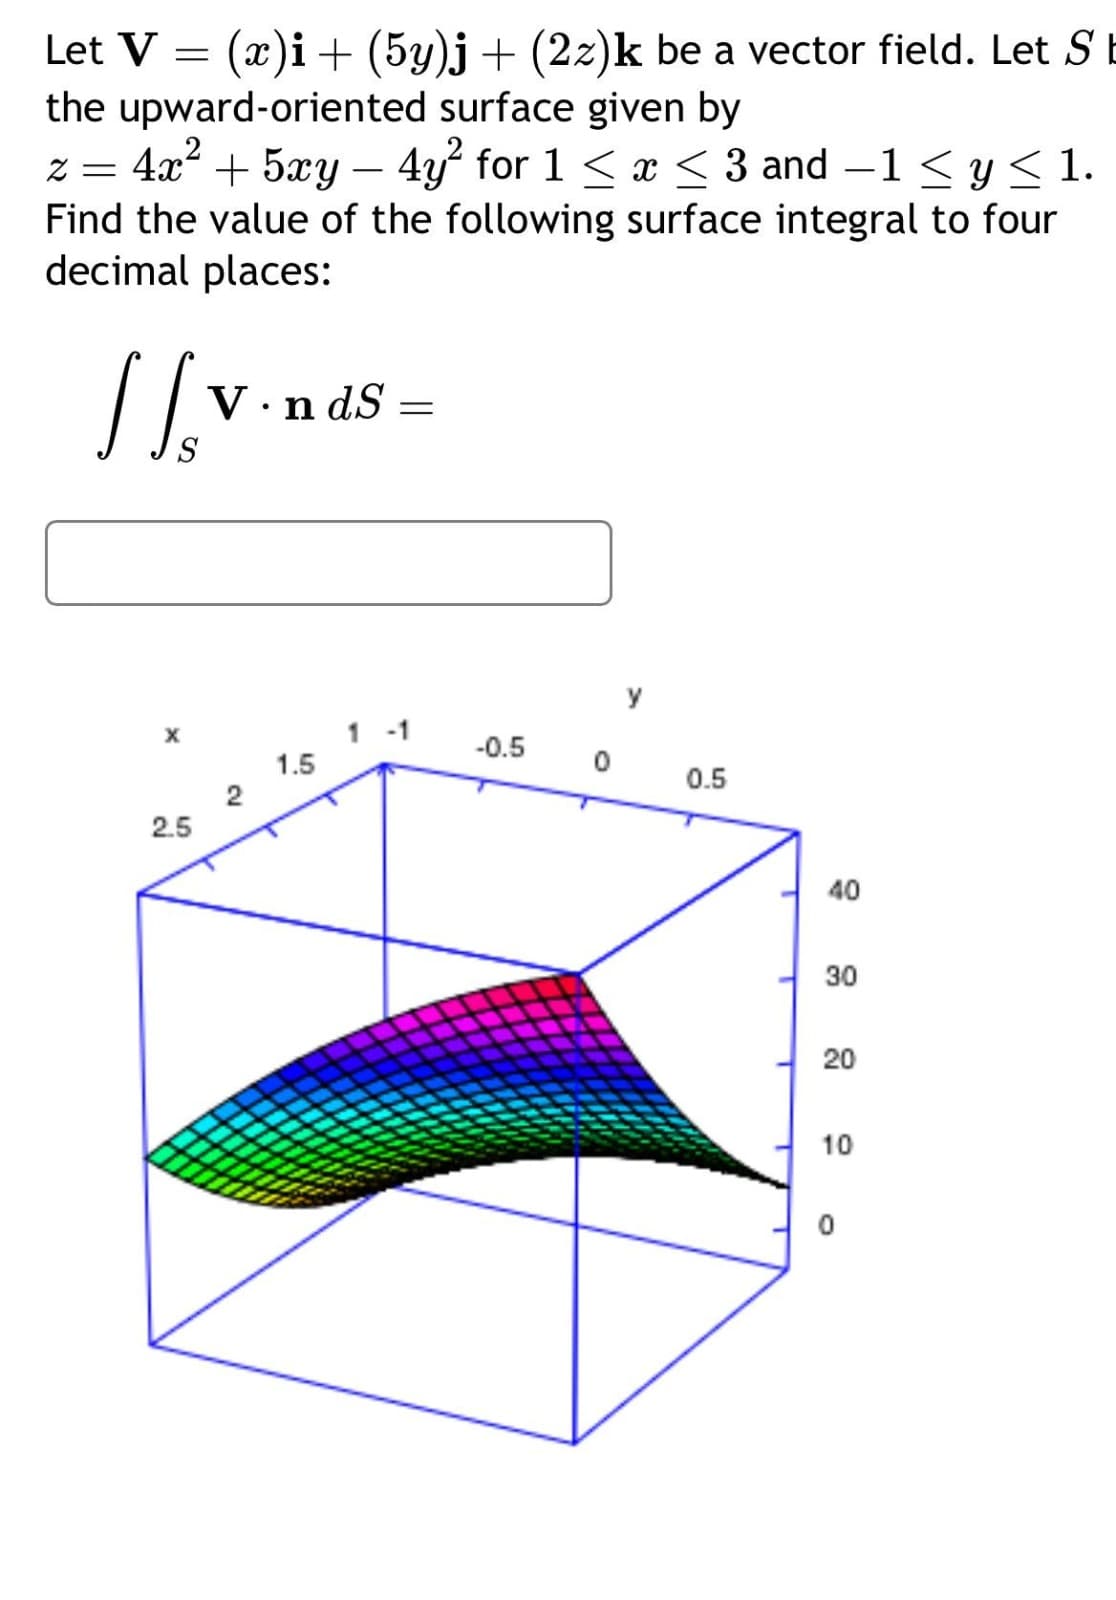 Let V = (x)i + (5y)j + (2z)k be a vector field. Let S
the upward-oriented surface given by
z = 4x² + 5xy - 4y² for 1 ≤ x ≤ 3 and −1 ≤ y ≤ 1.
Find the value of the following surface integral to four
decimal places:
[[.v.
X
2.5
V.ndS=
2
1.5
-0.5
0
0.5
40
30
20
10
0